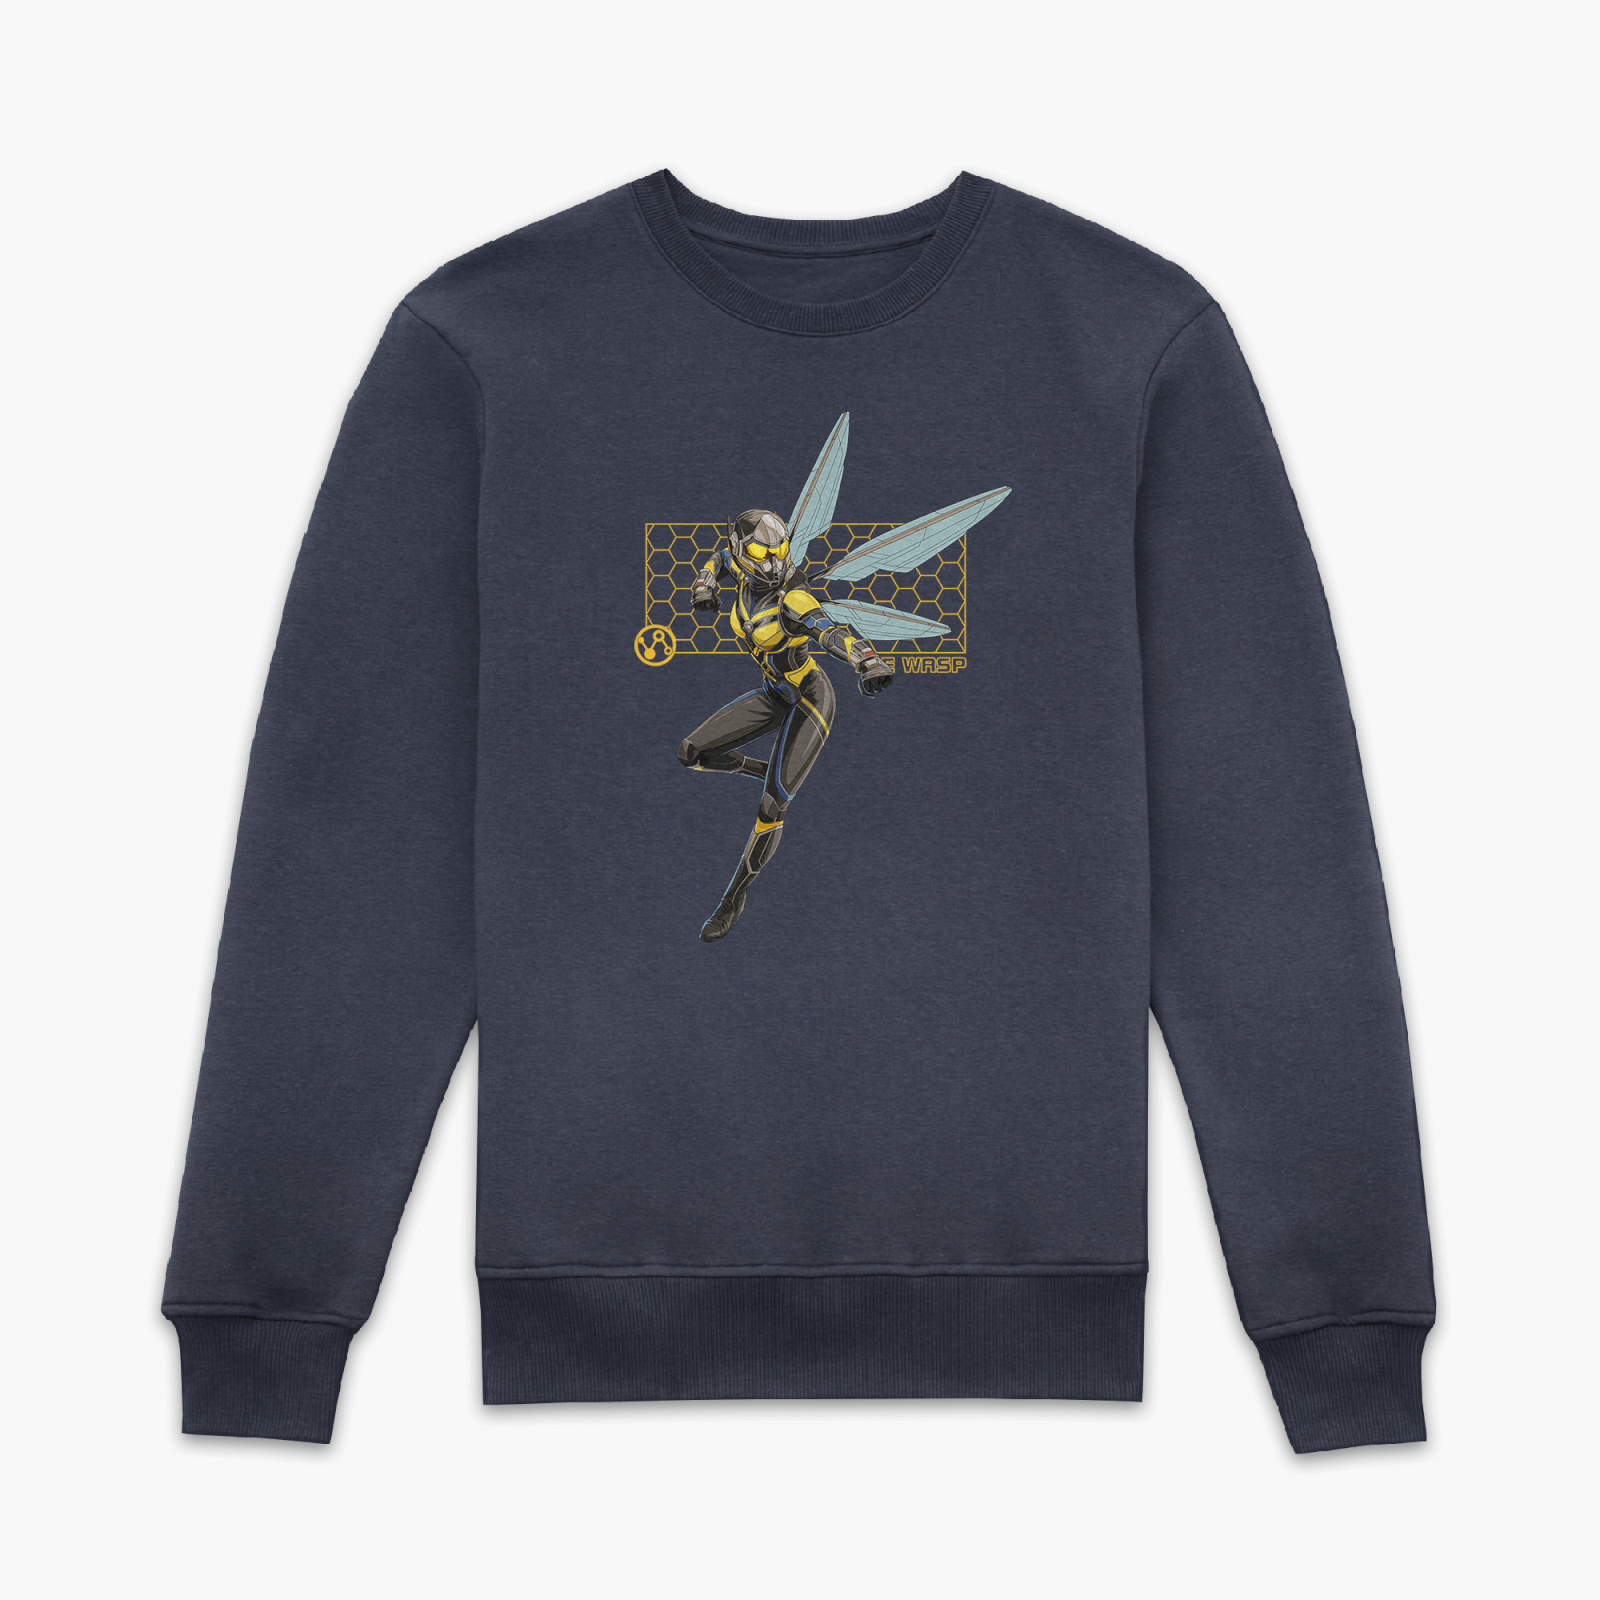 Marvel Ant-Man & The Wasp: Quantumania The Wasp Hex Sweatshirt - Navy - XS - Navy